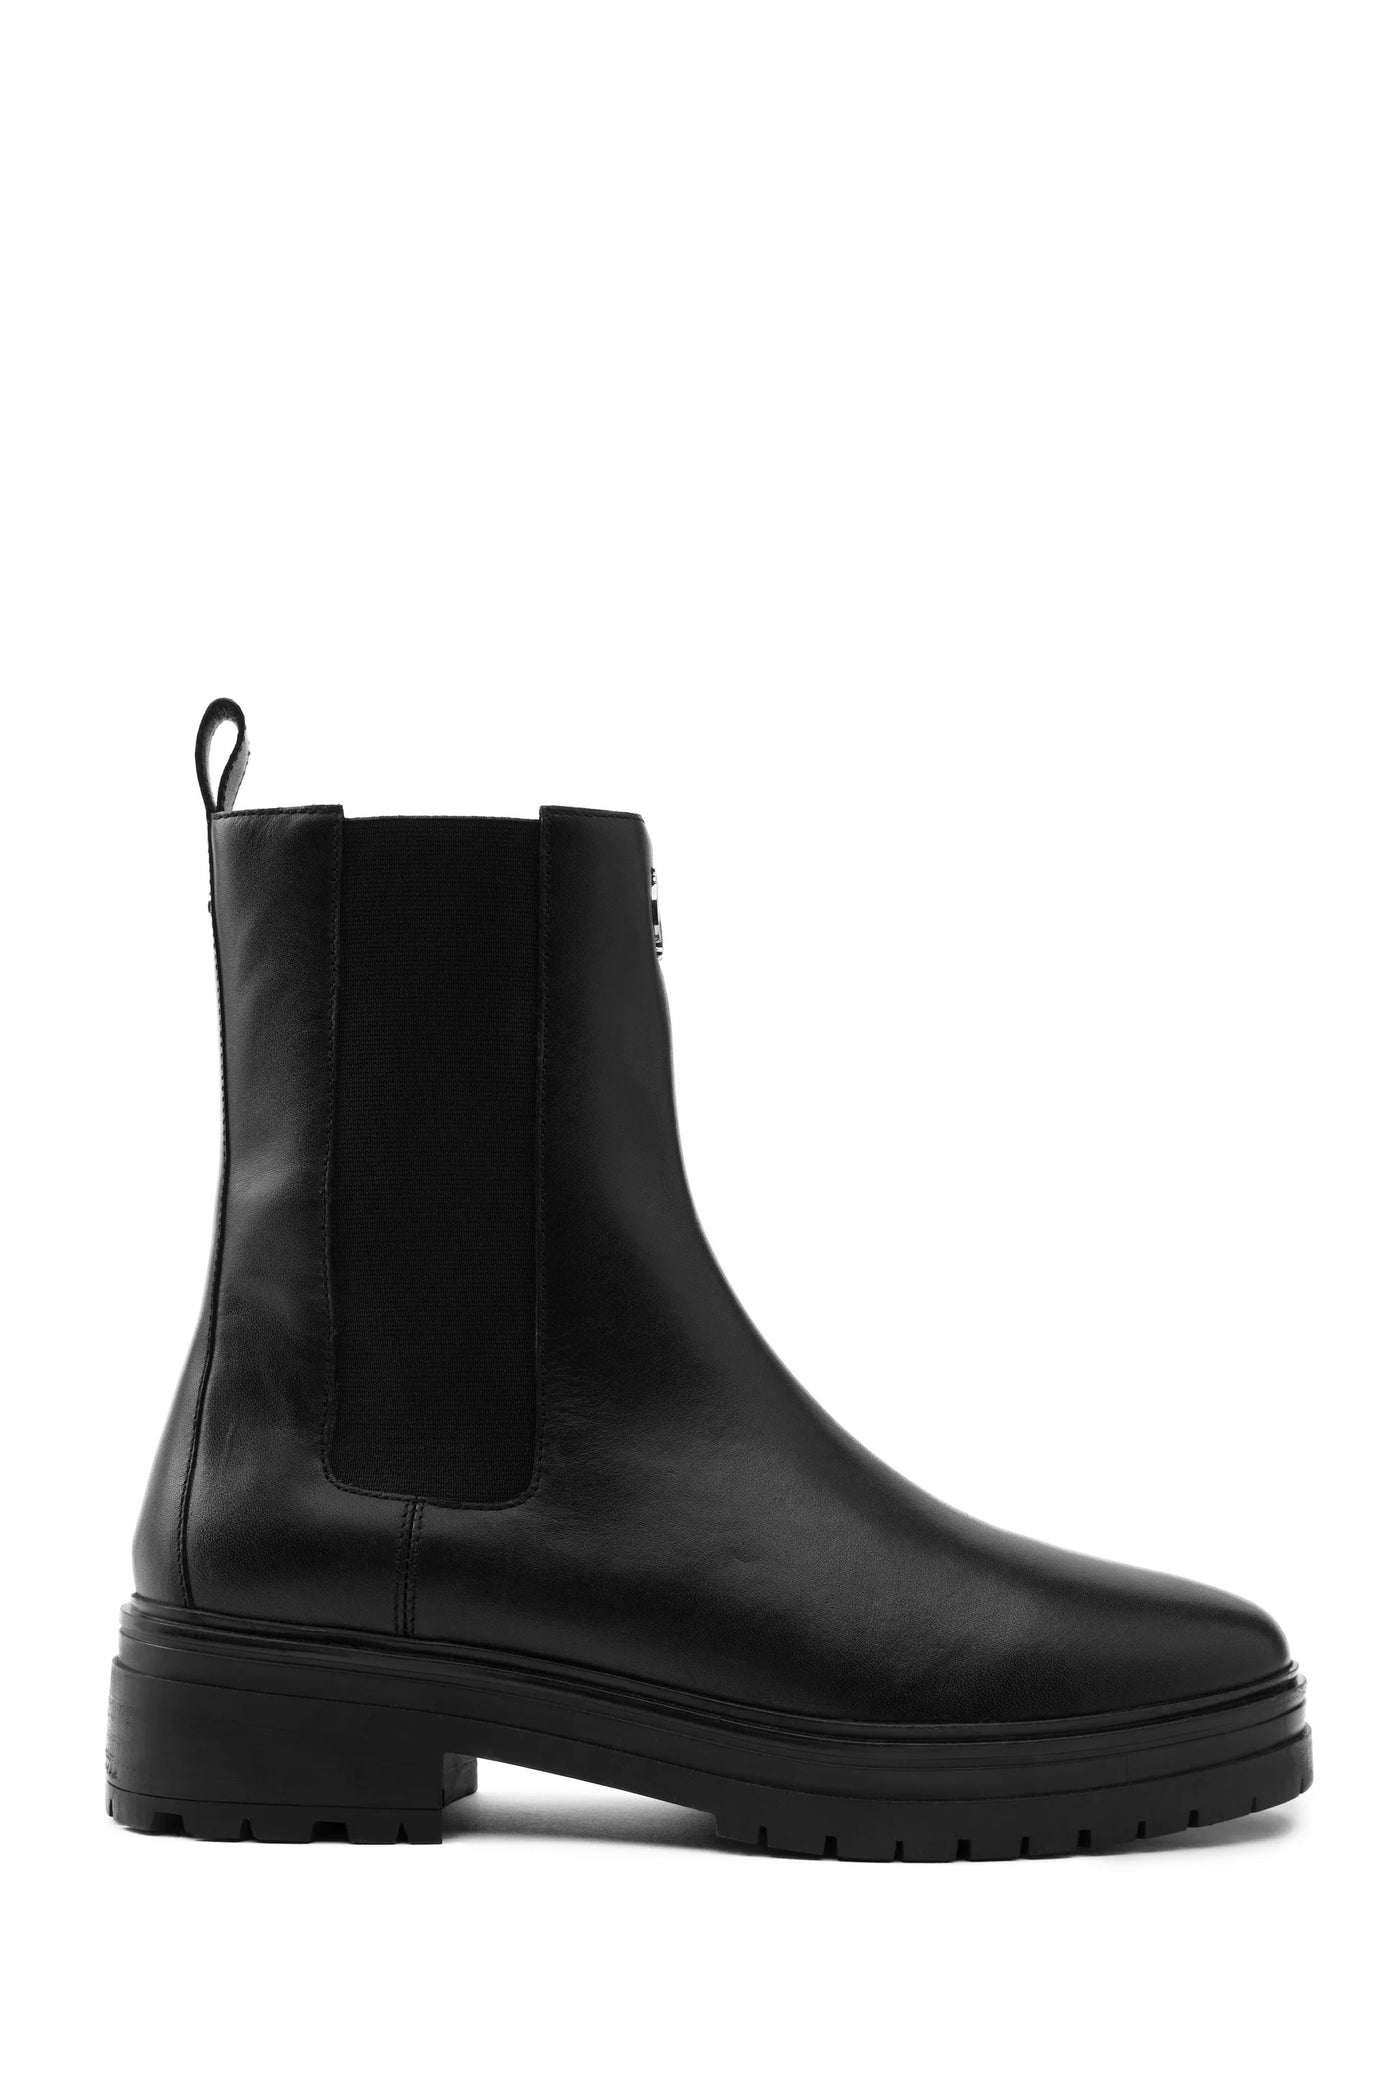 Holland Cooper Astoria Ankle Boot in Black Side